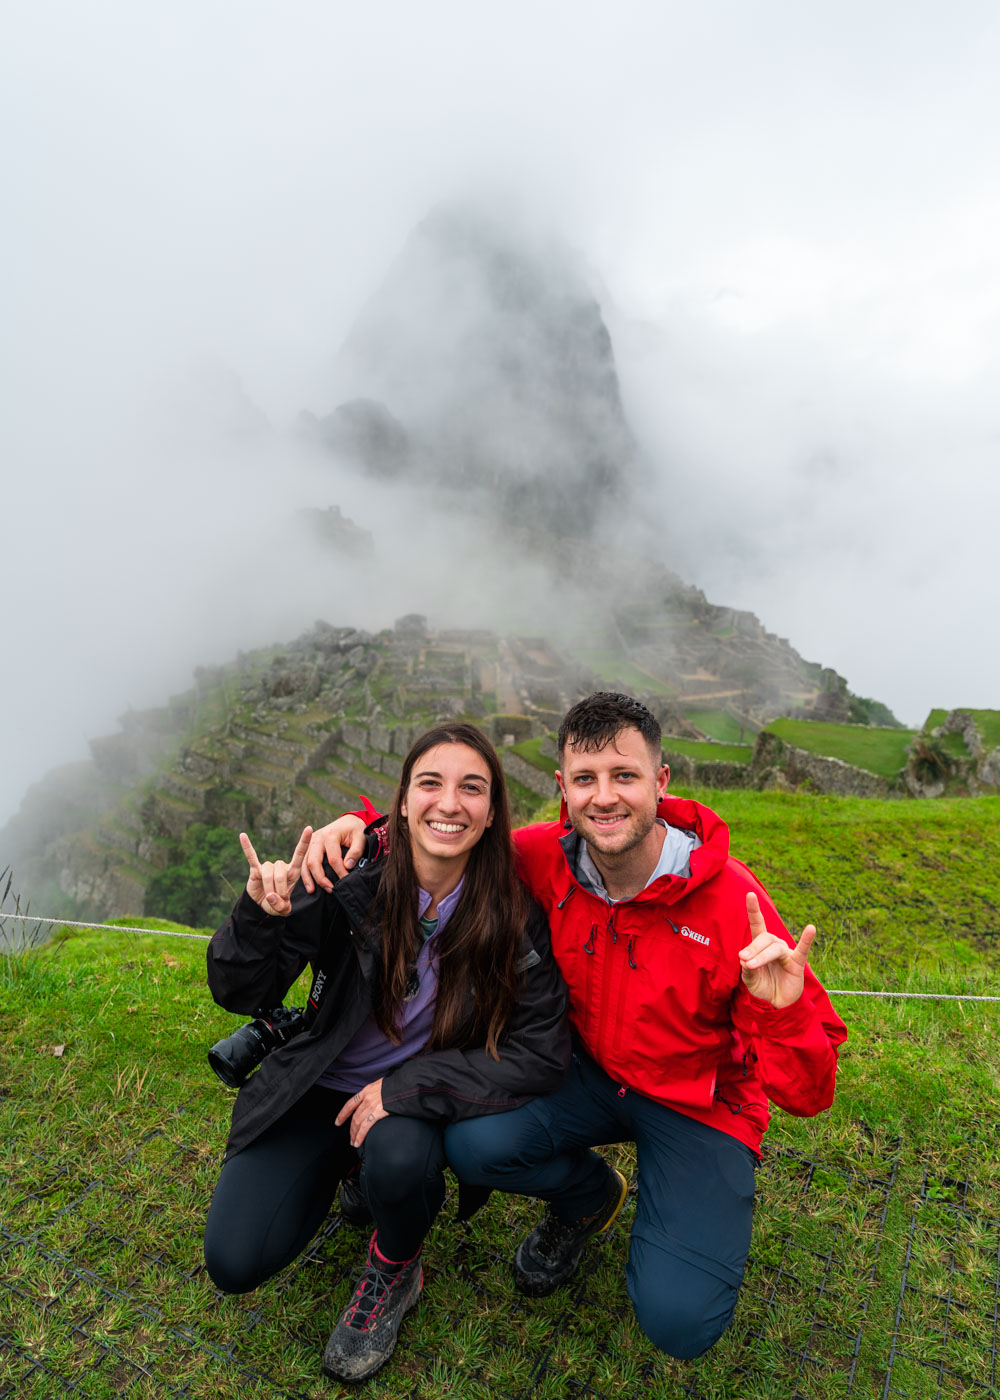 Ryan and Sara wet from the rain dressed in hiking gear posing in front of a cloudy Machu Picchu.